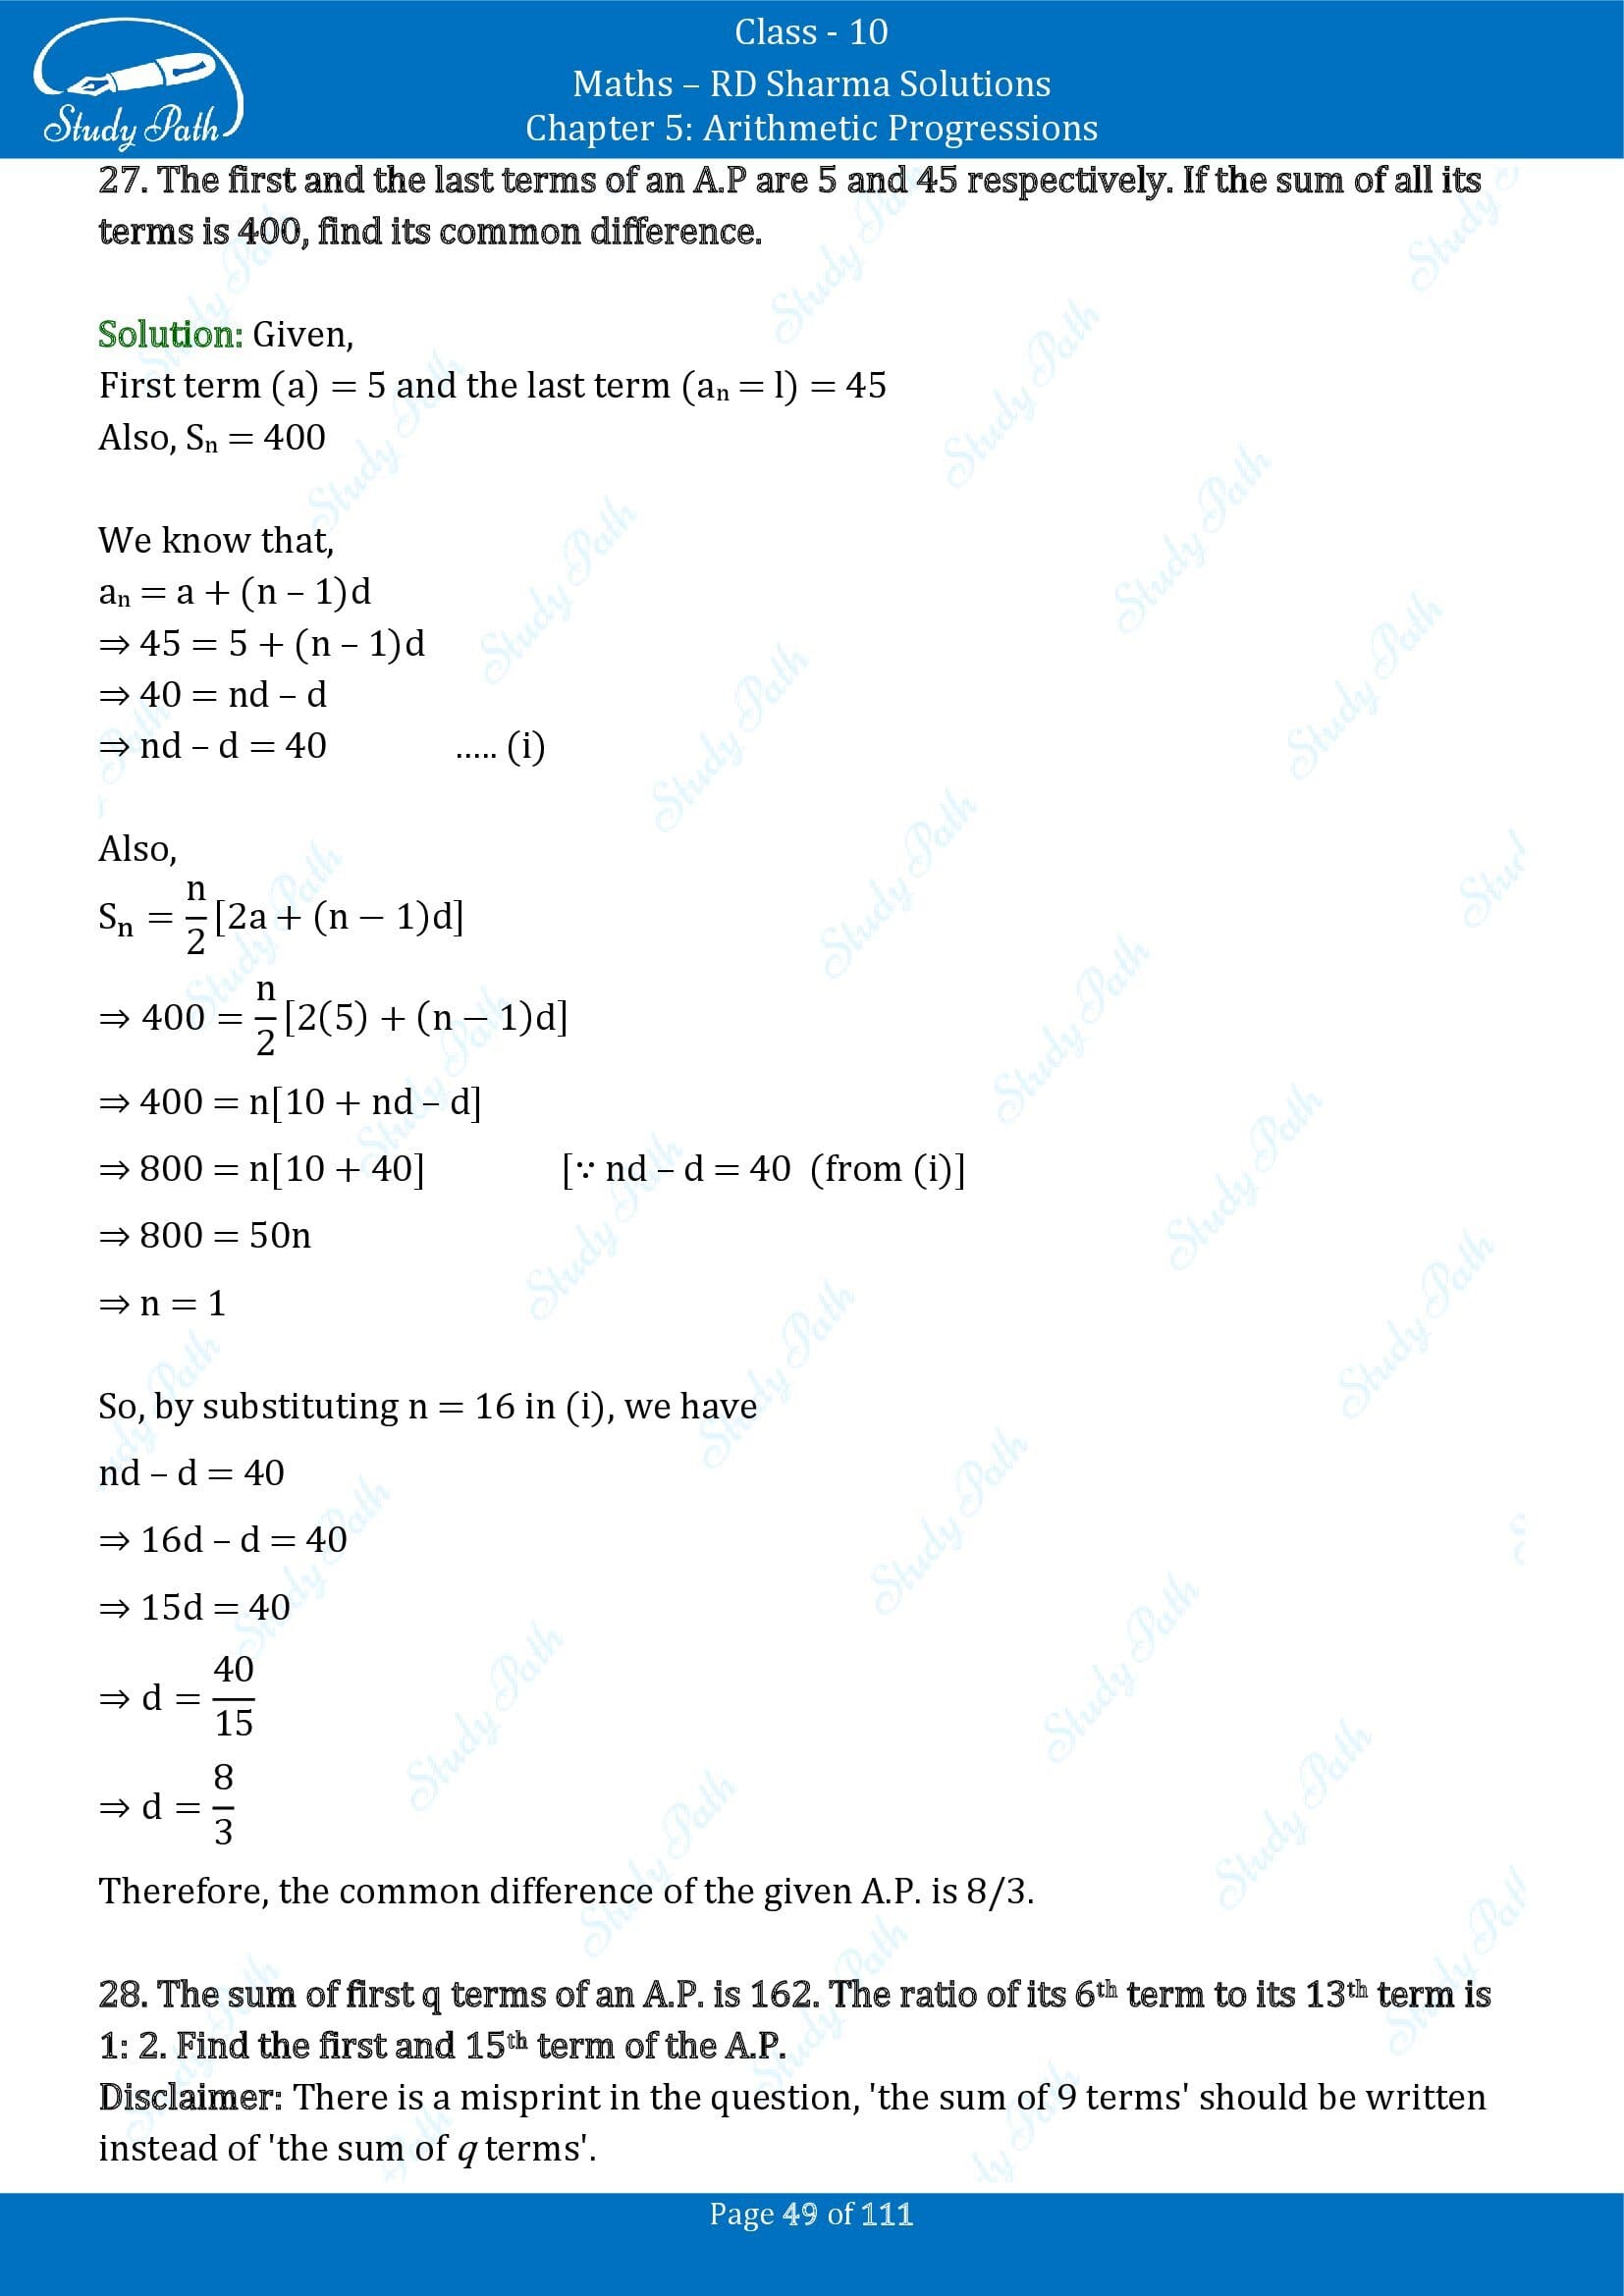 RD Sharma Solutions Class 10 Chapter 5 Arithmetic Progressions Exercise 5.6 00049